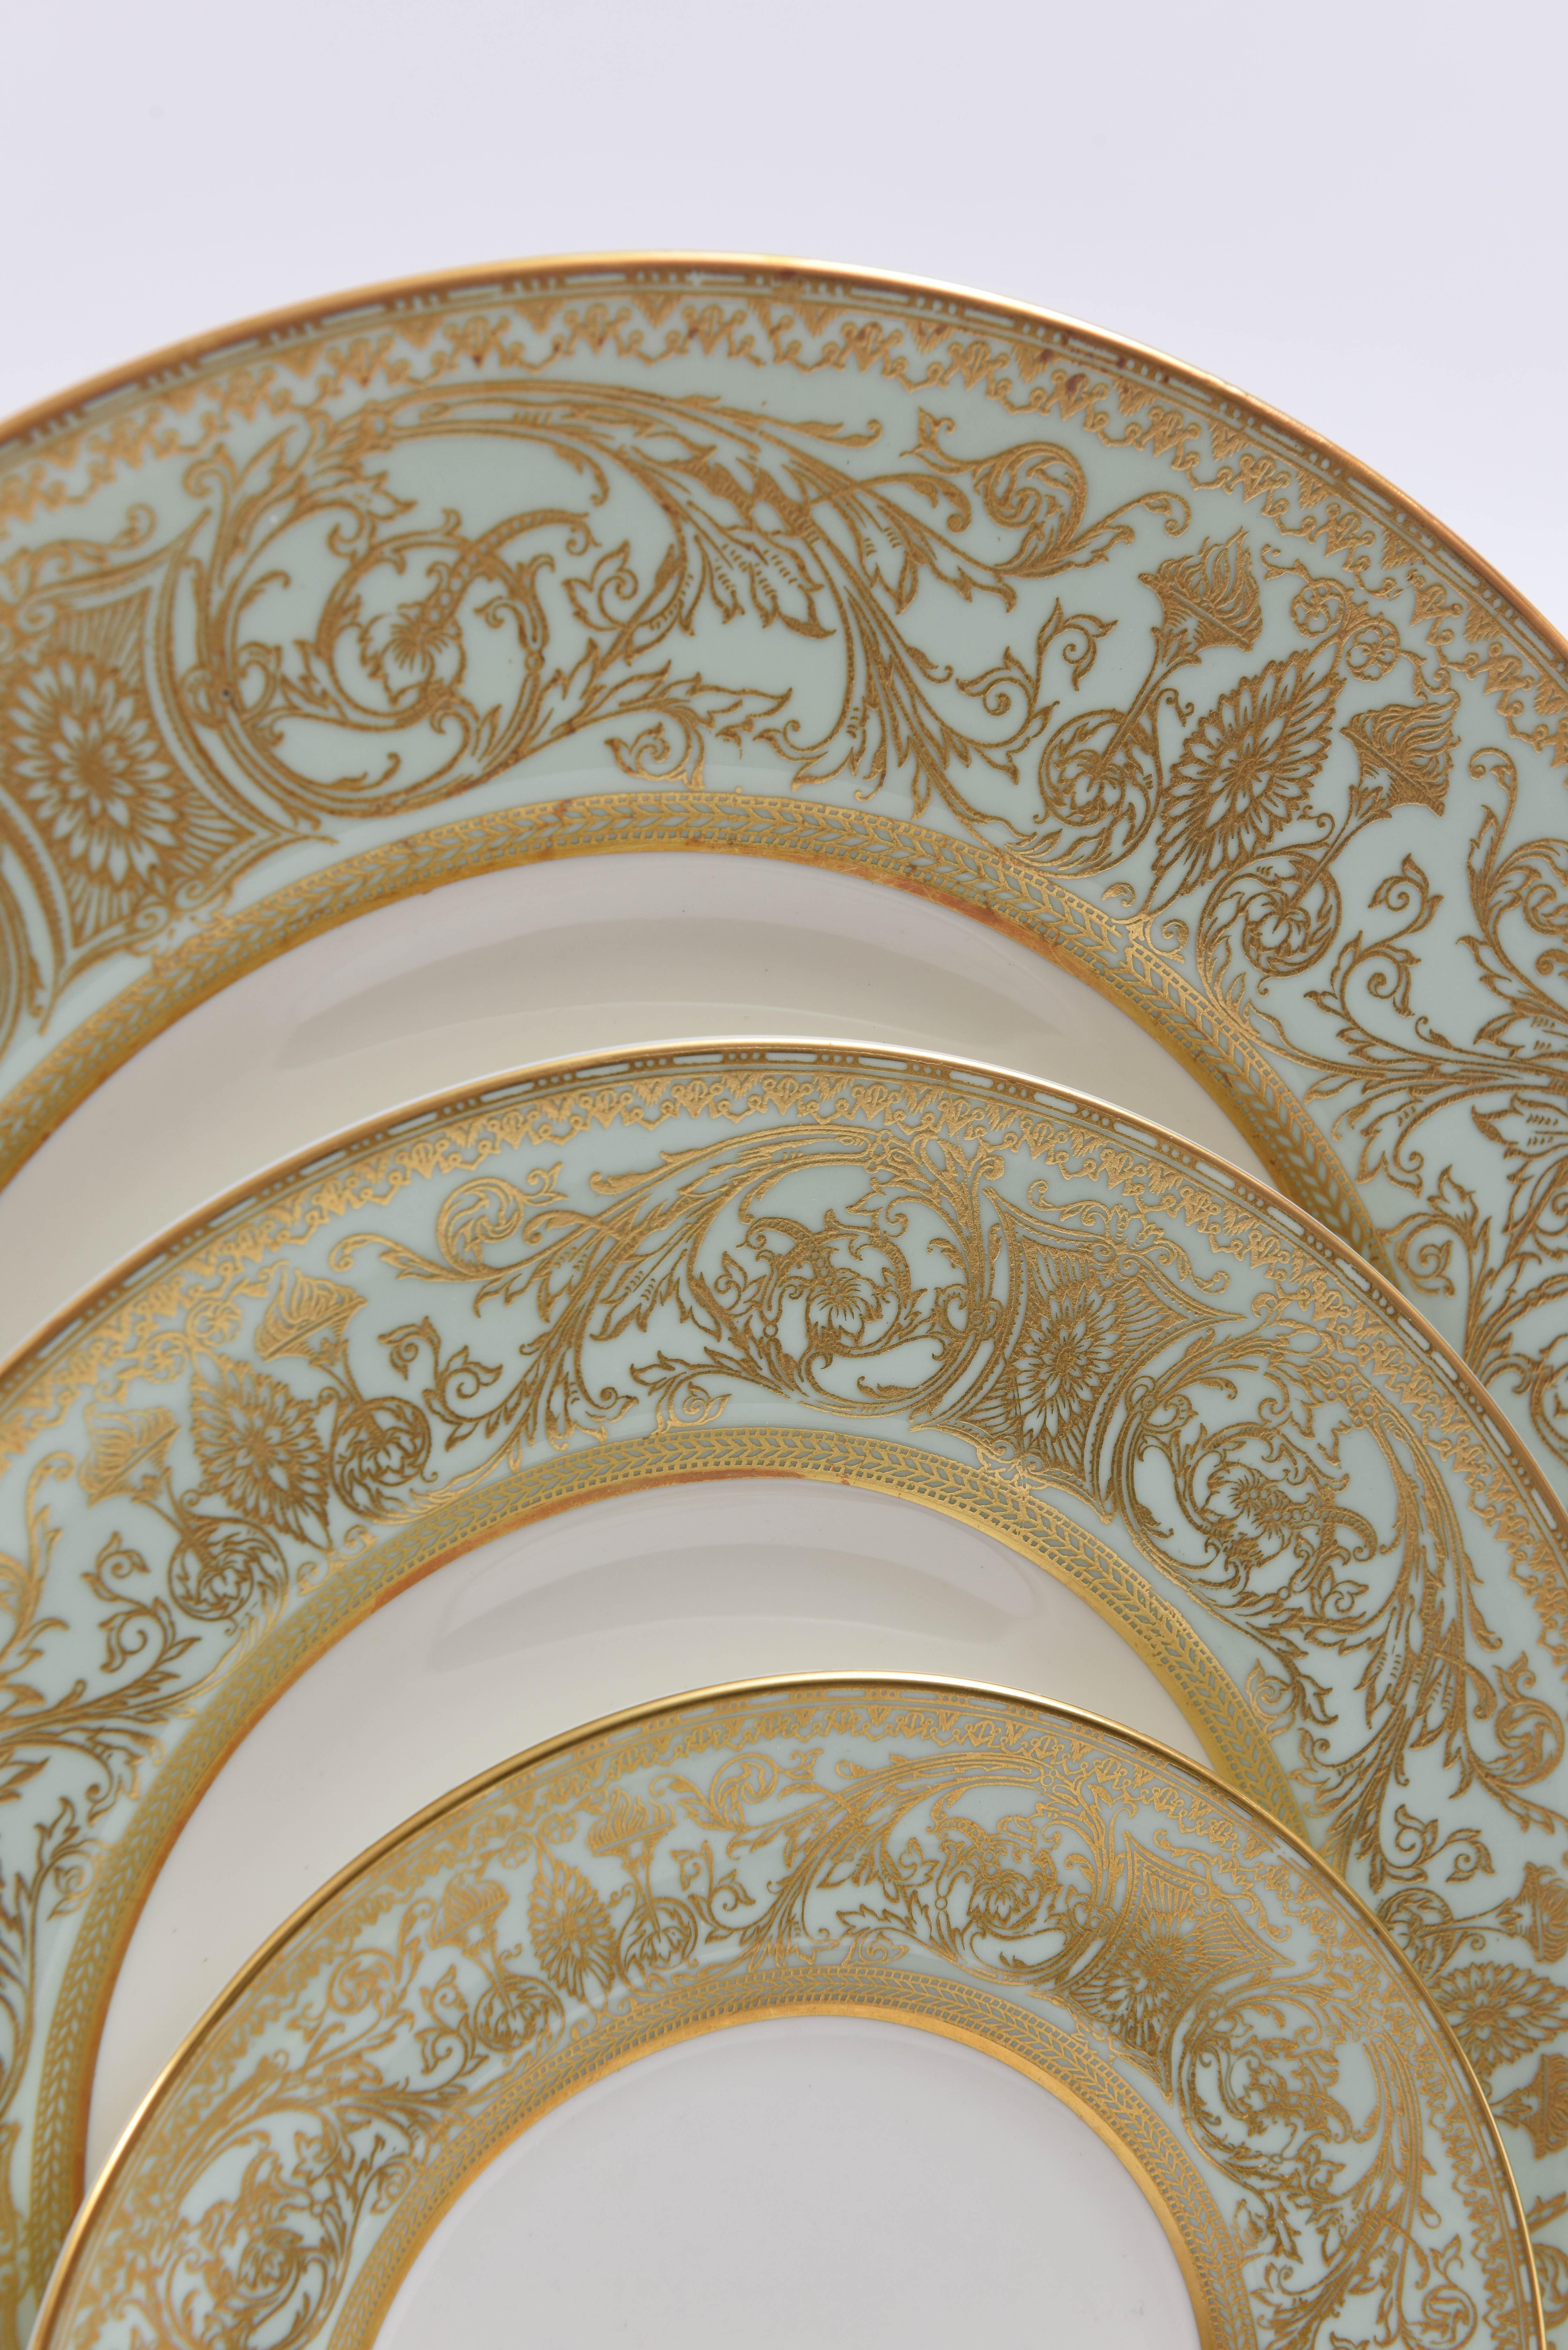 Extensive English Porcelain Service for 12, Lovely Sage Mint Green Gilded 106 Pc 1